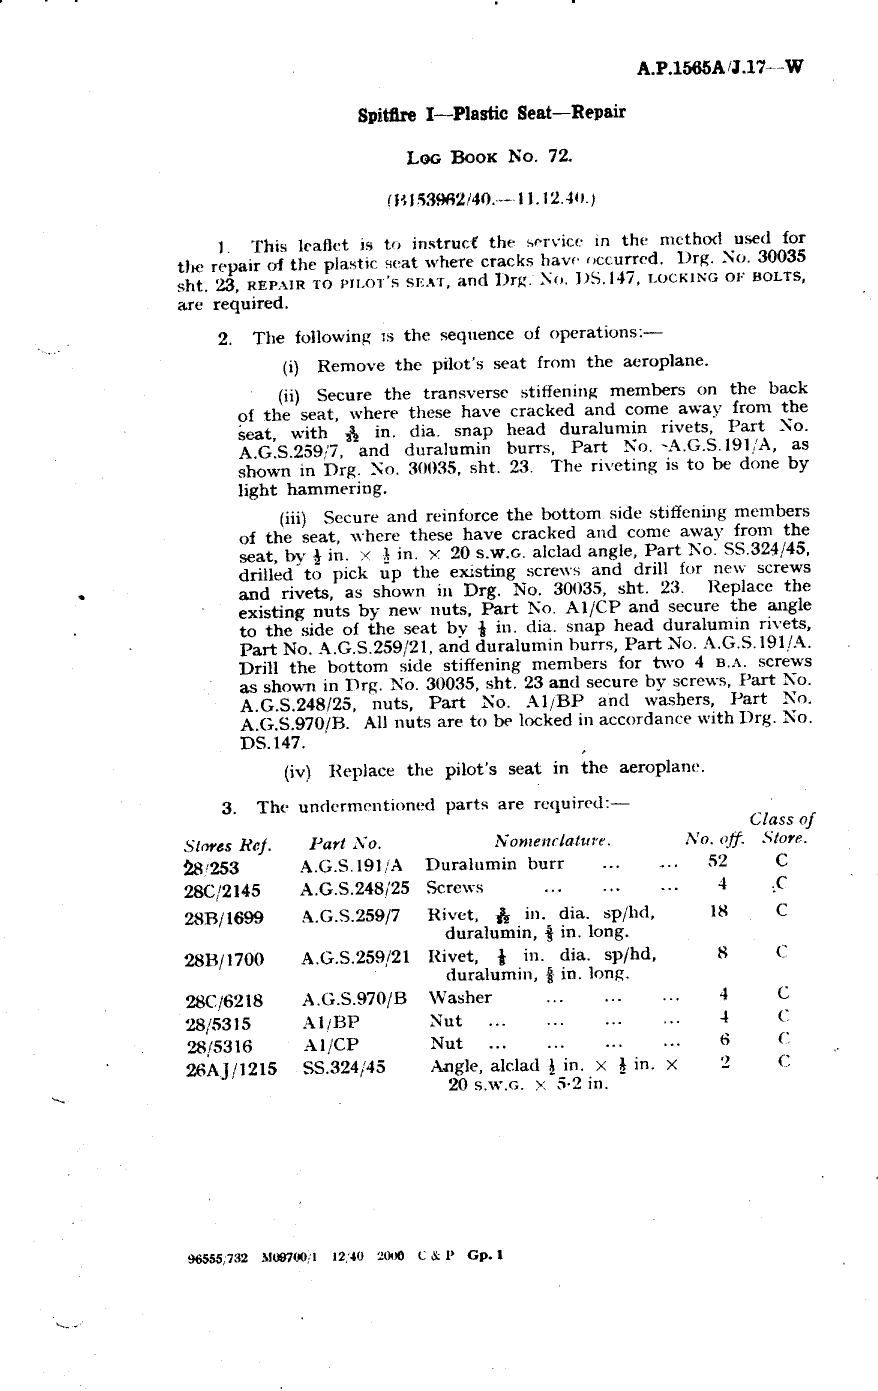 Sample page 1 from AirCorps Library document: Spitfire I Plastic Seat Repair